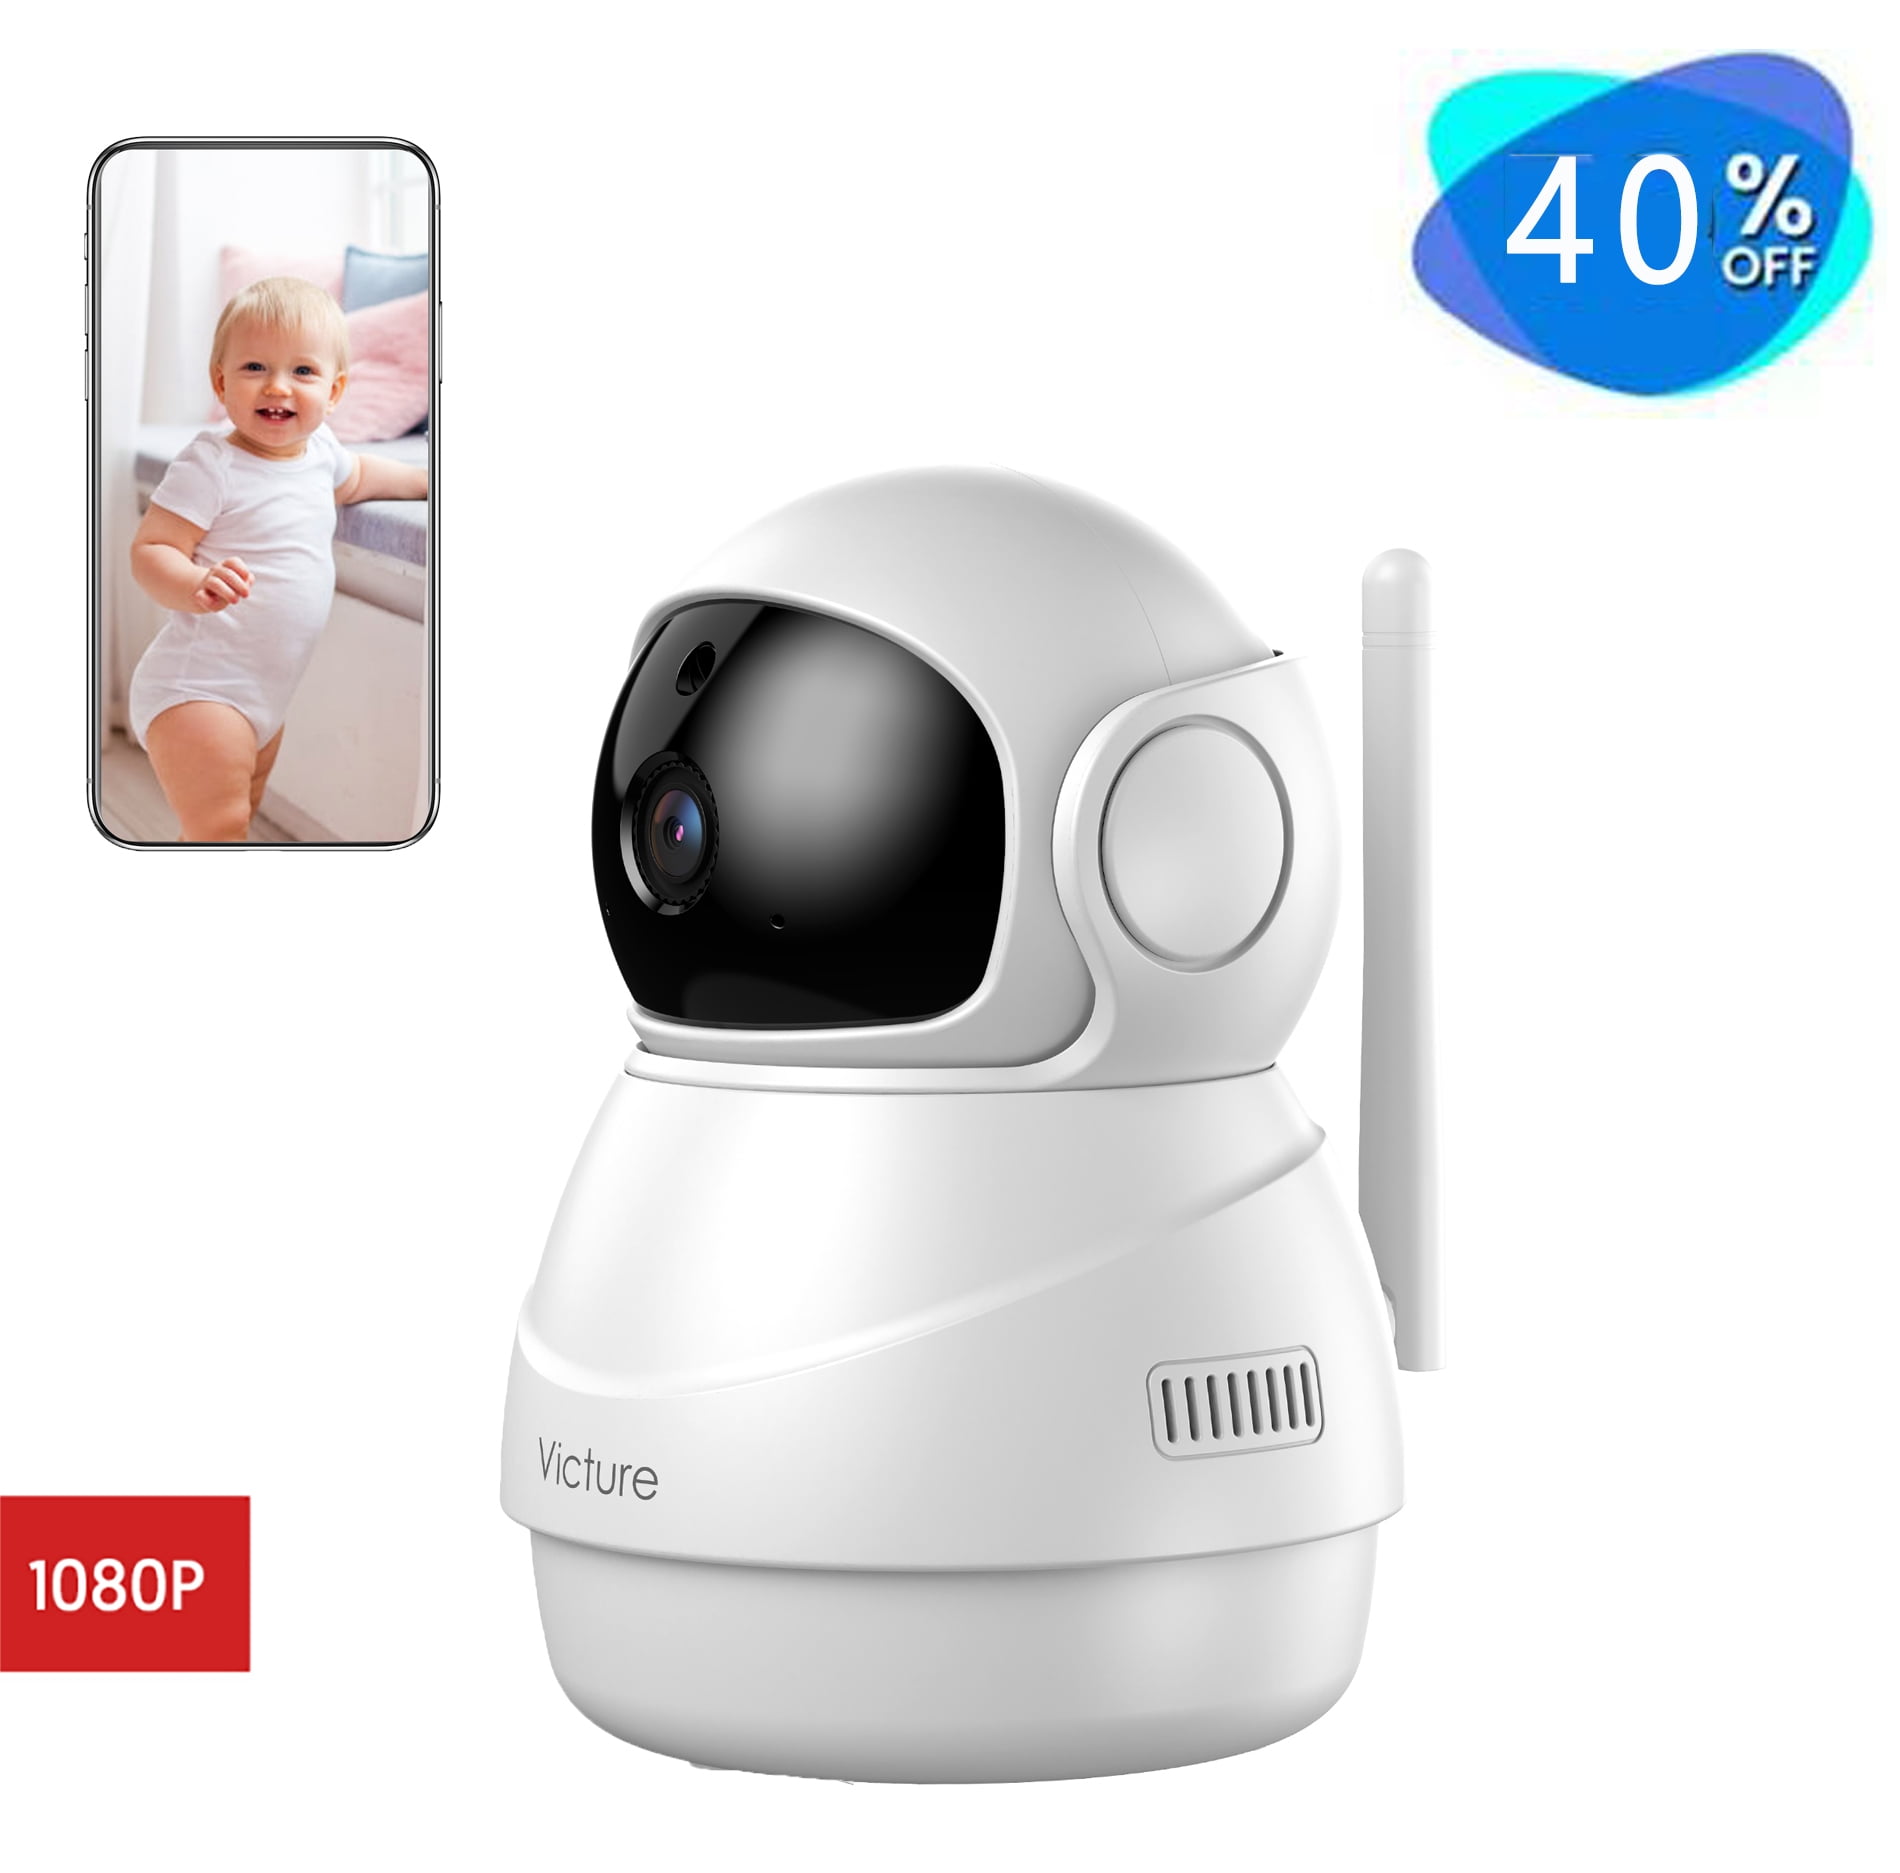 Victure 1080P FHD WiFi IP Camera Baby Monitor with Night Vision Motion Detection 